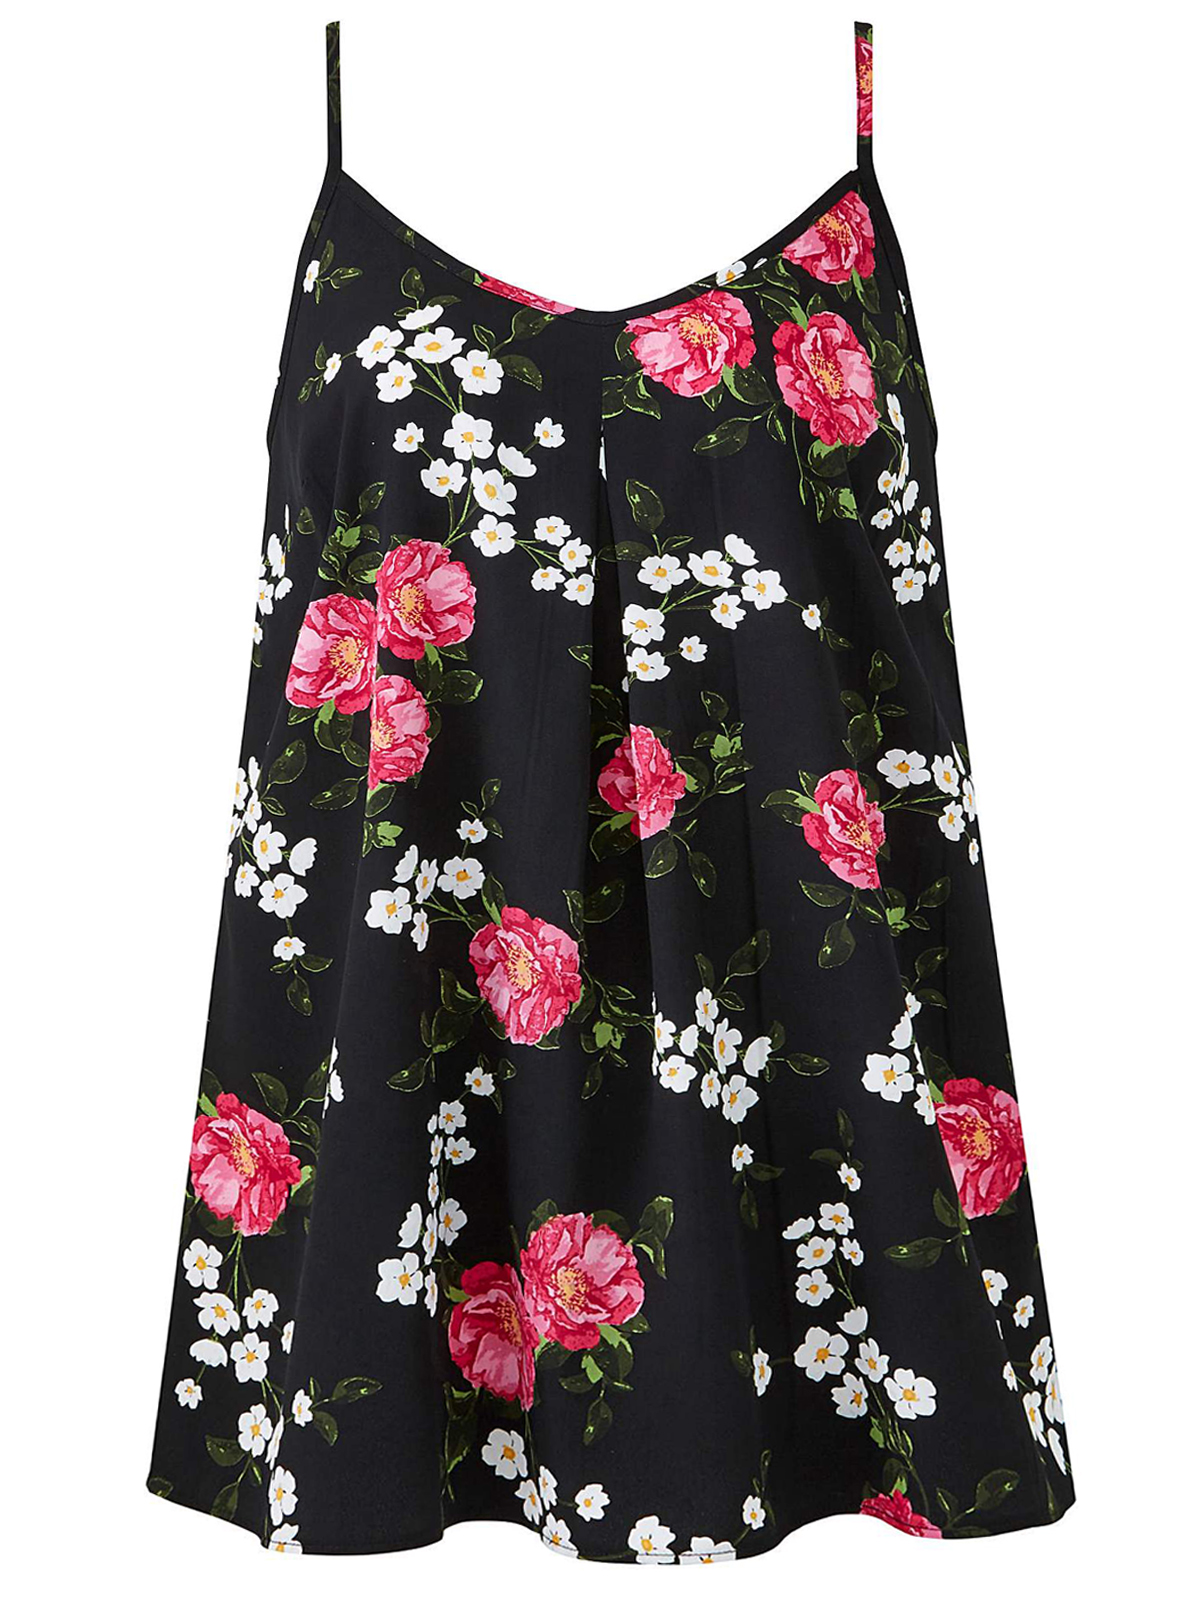 Capsule - - Capsule BLACK Floral Print Strappy Cami Top - Size 10 to 24